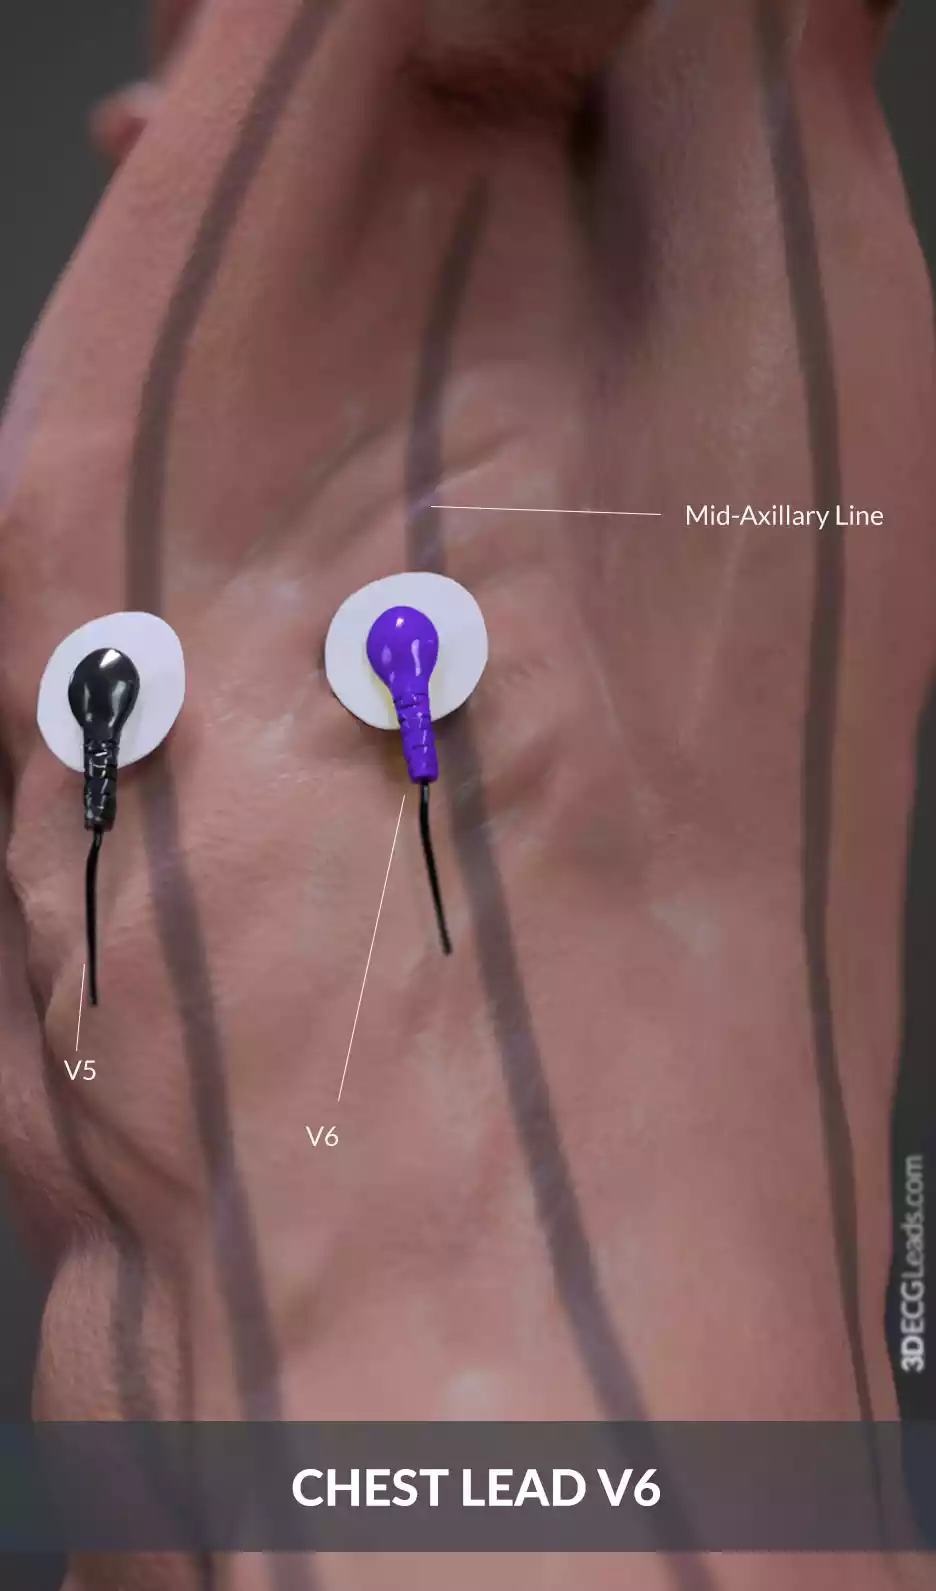 where to place ecg leads on chest